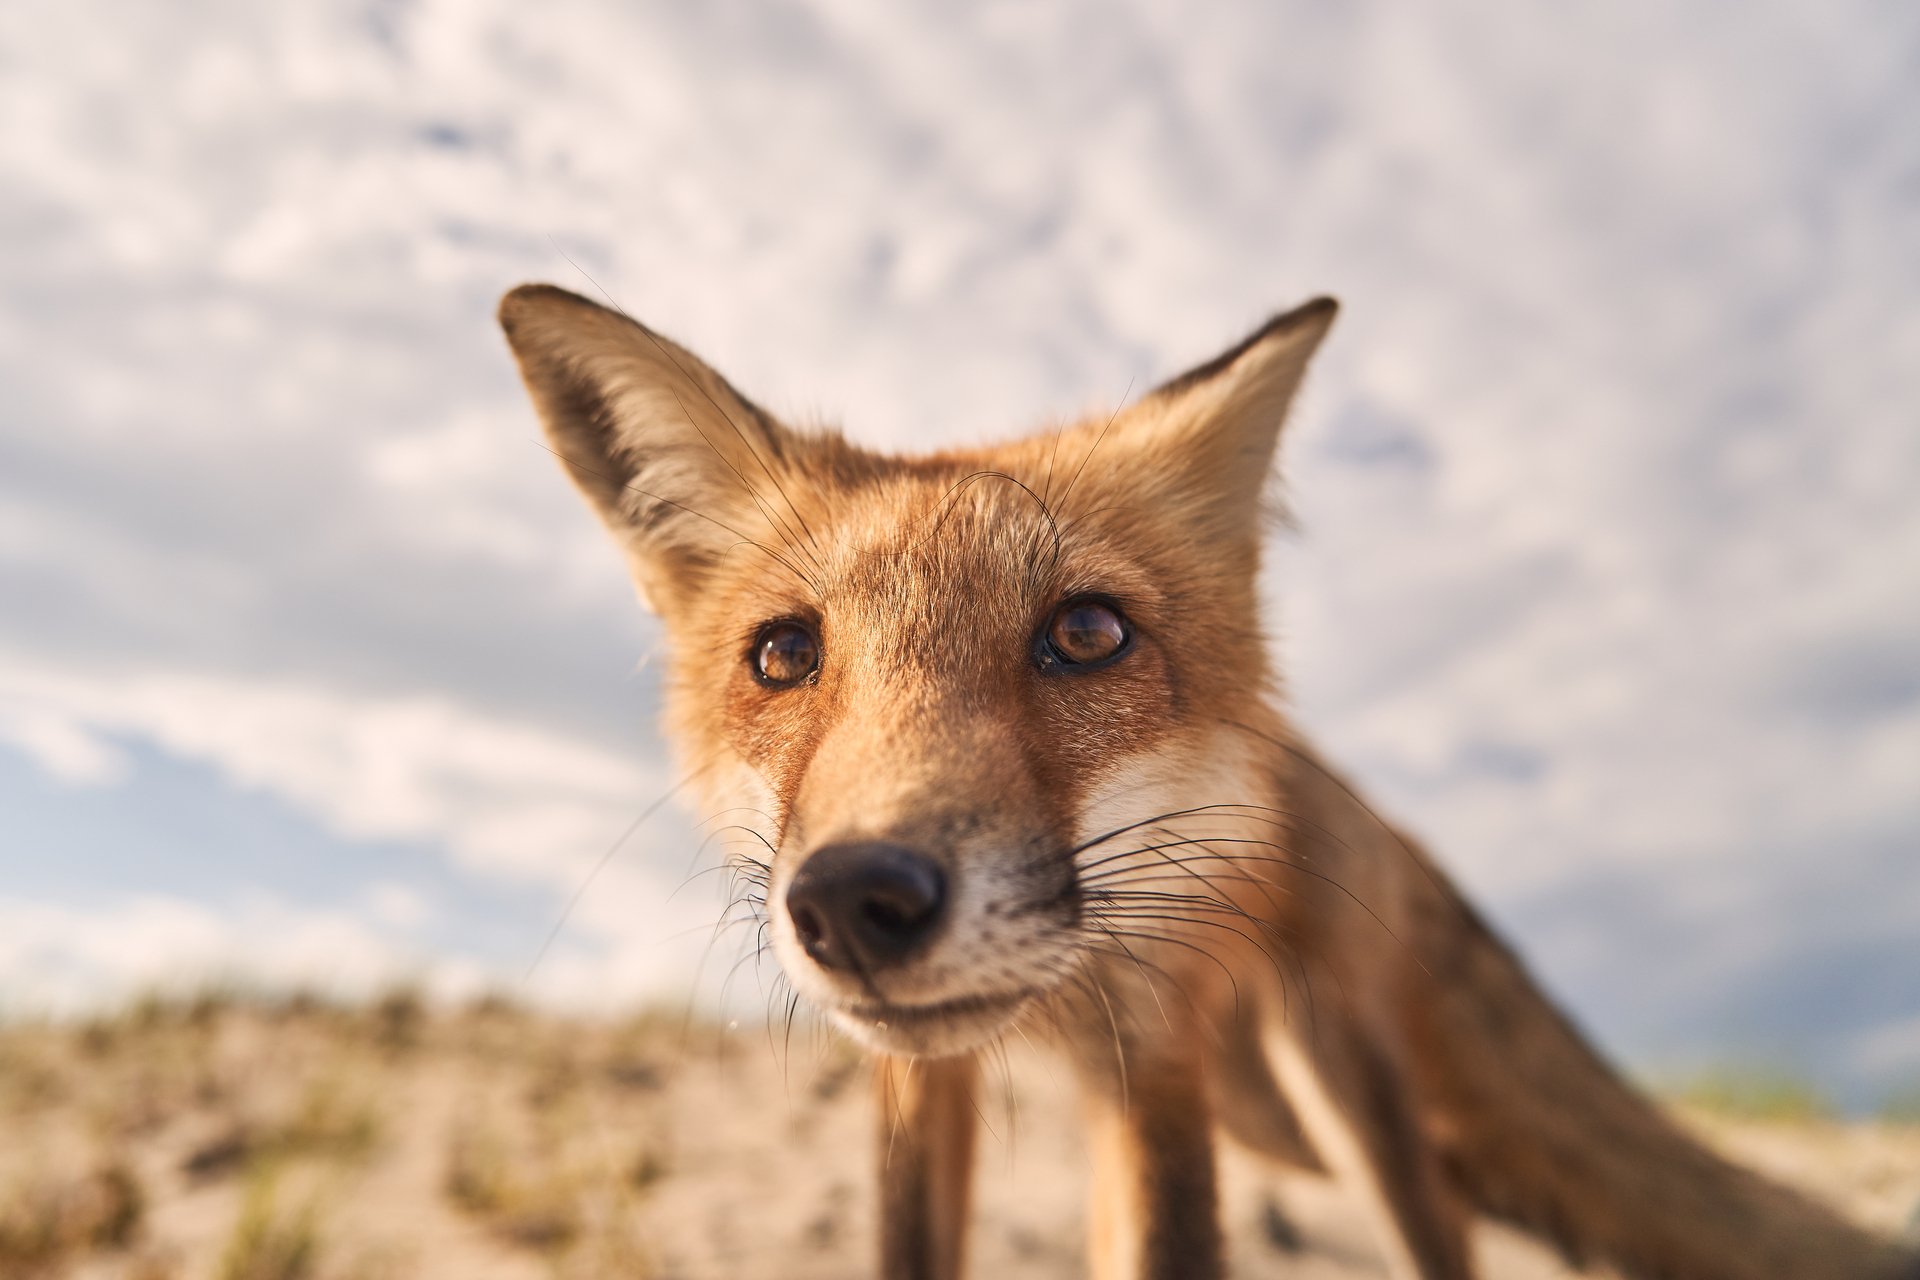 A red fox close to the camera, curiously sniffing.